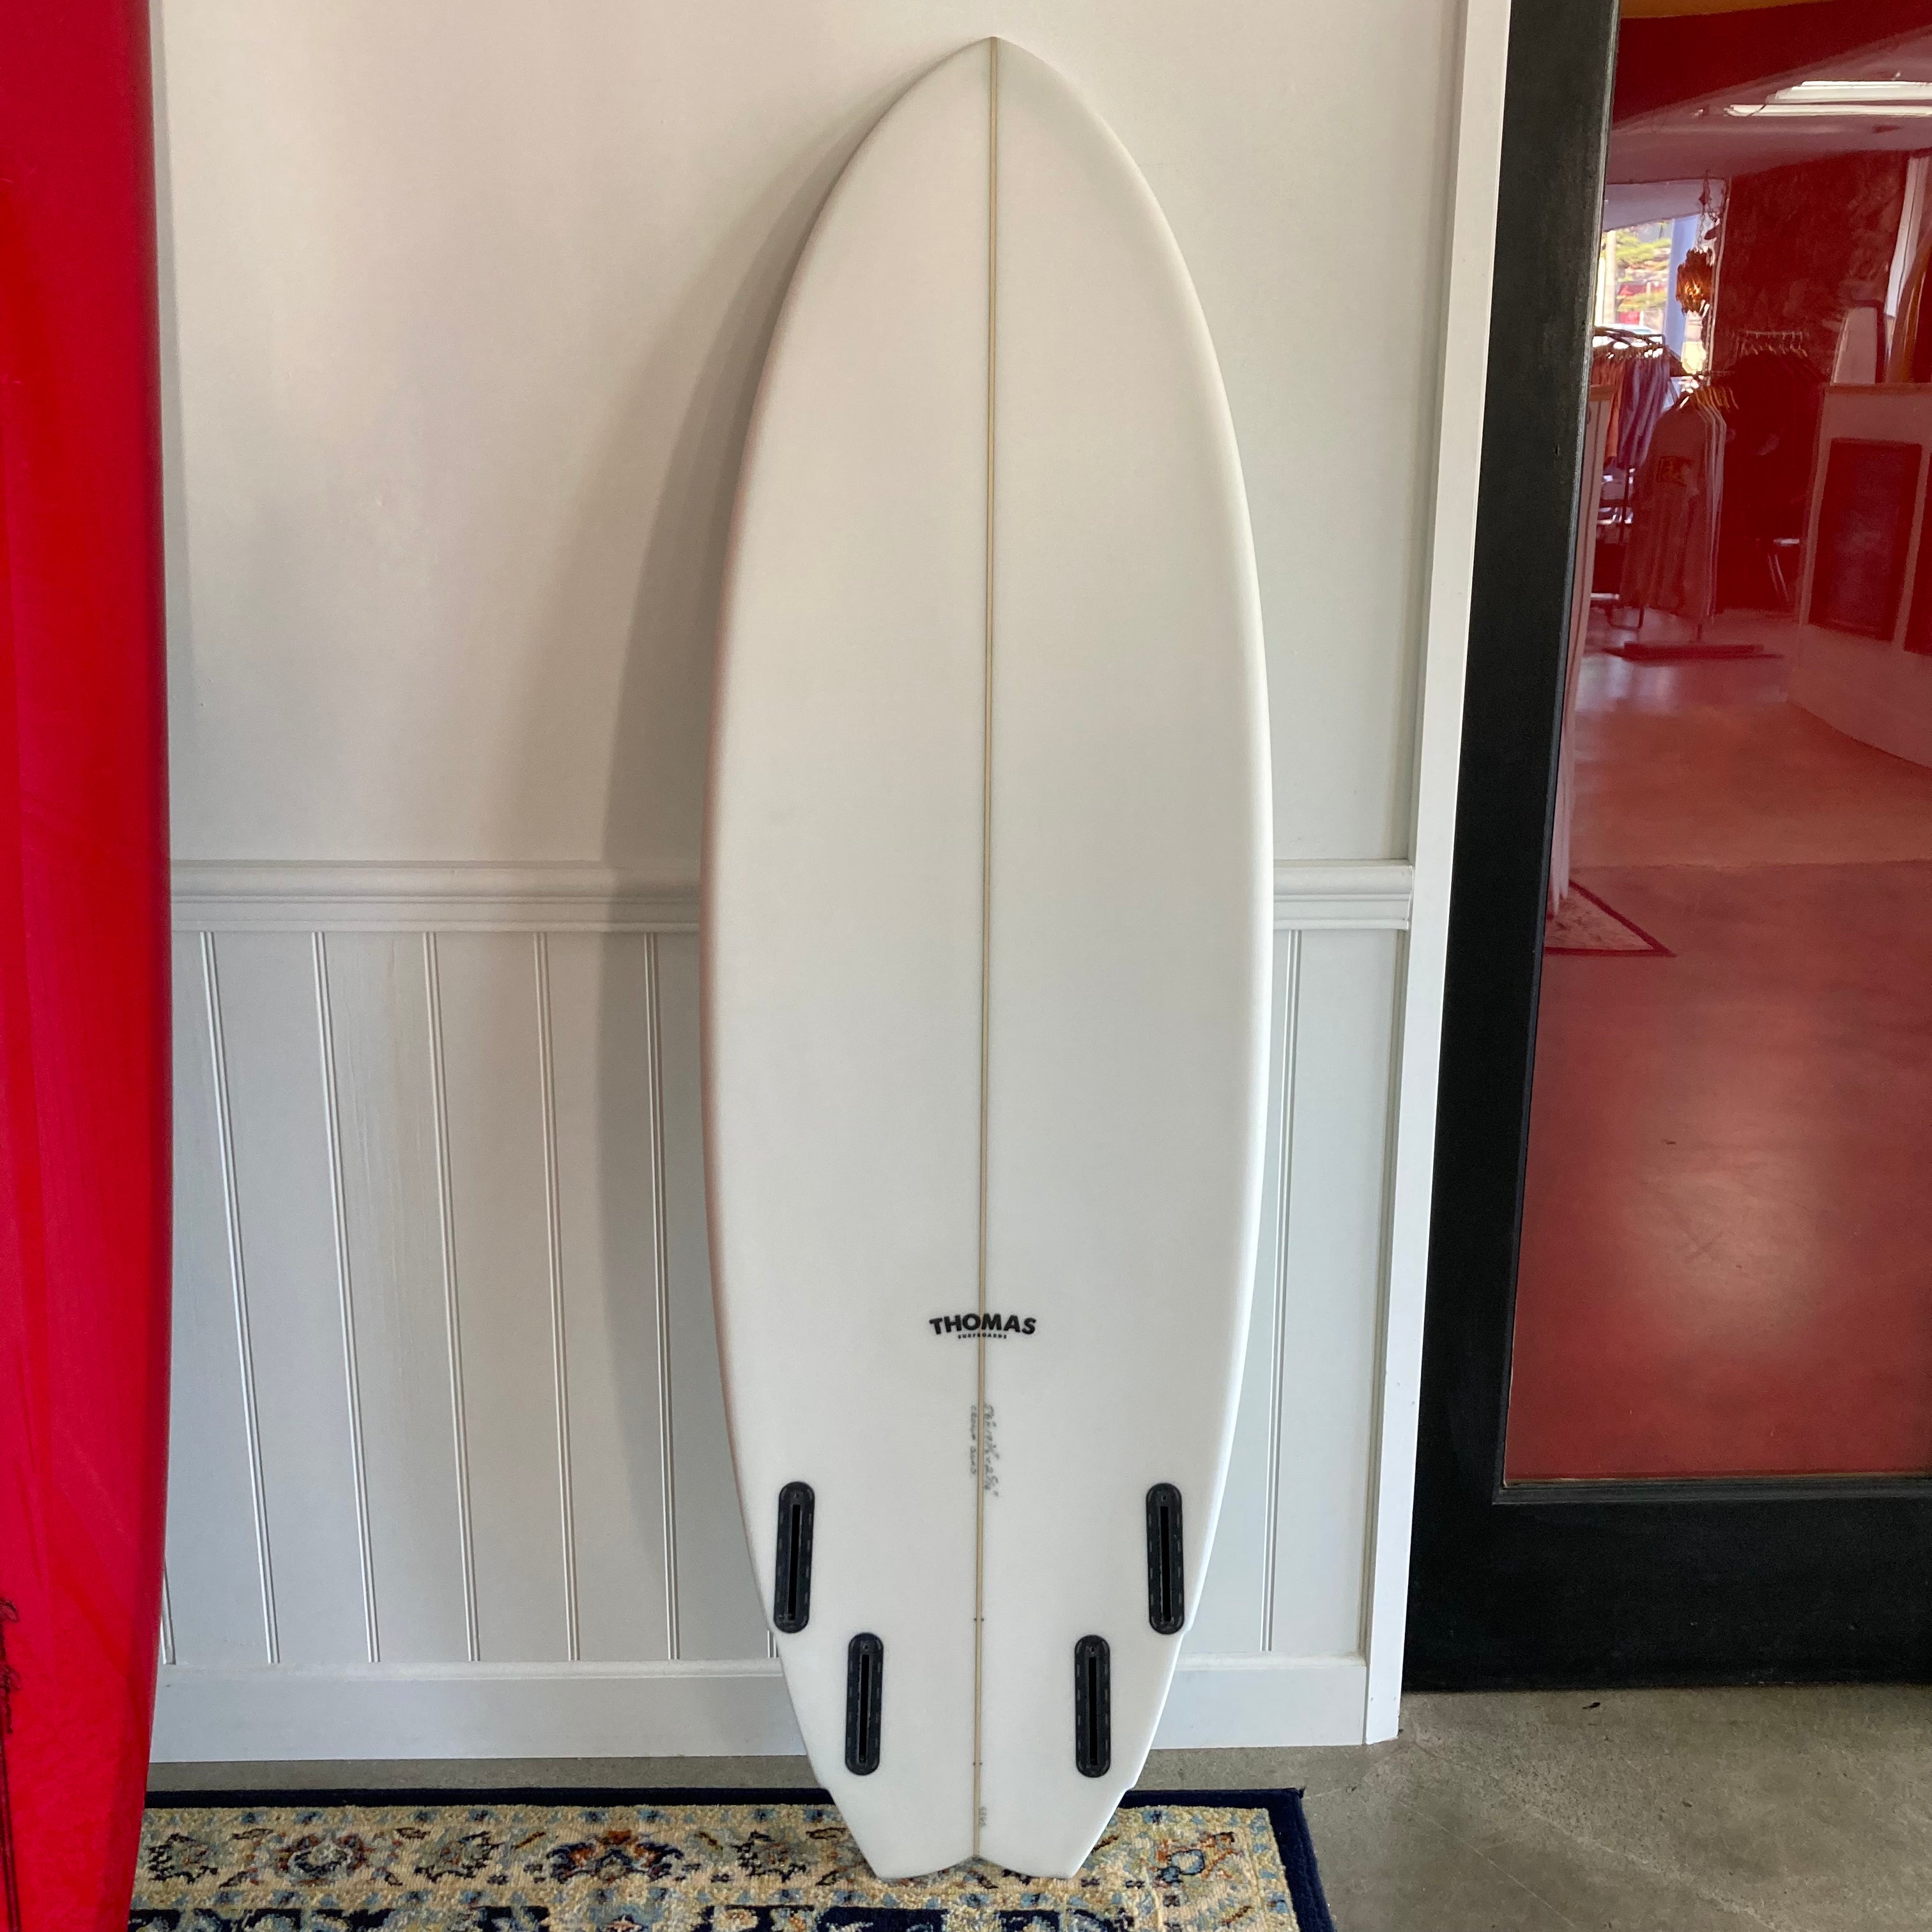 Thomas Surfboards – Icons of Surf